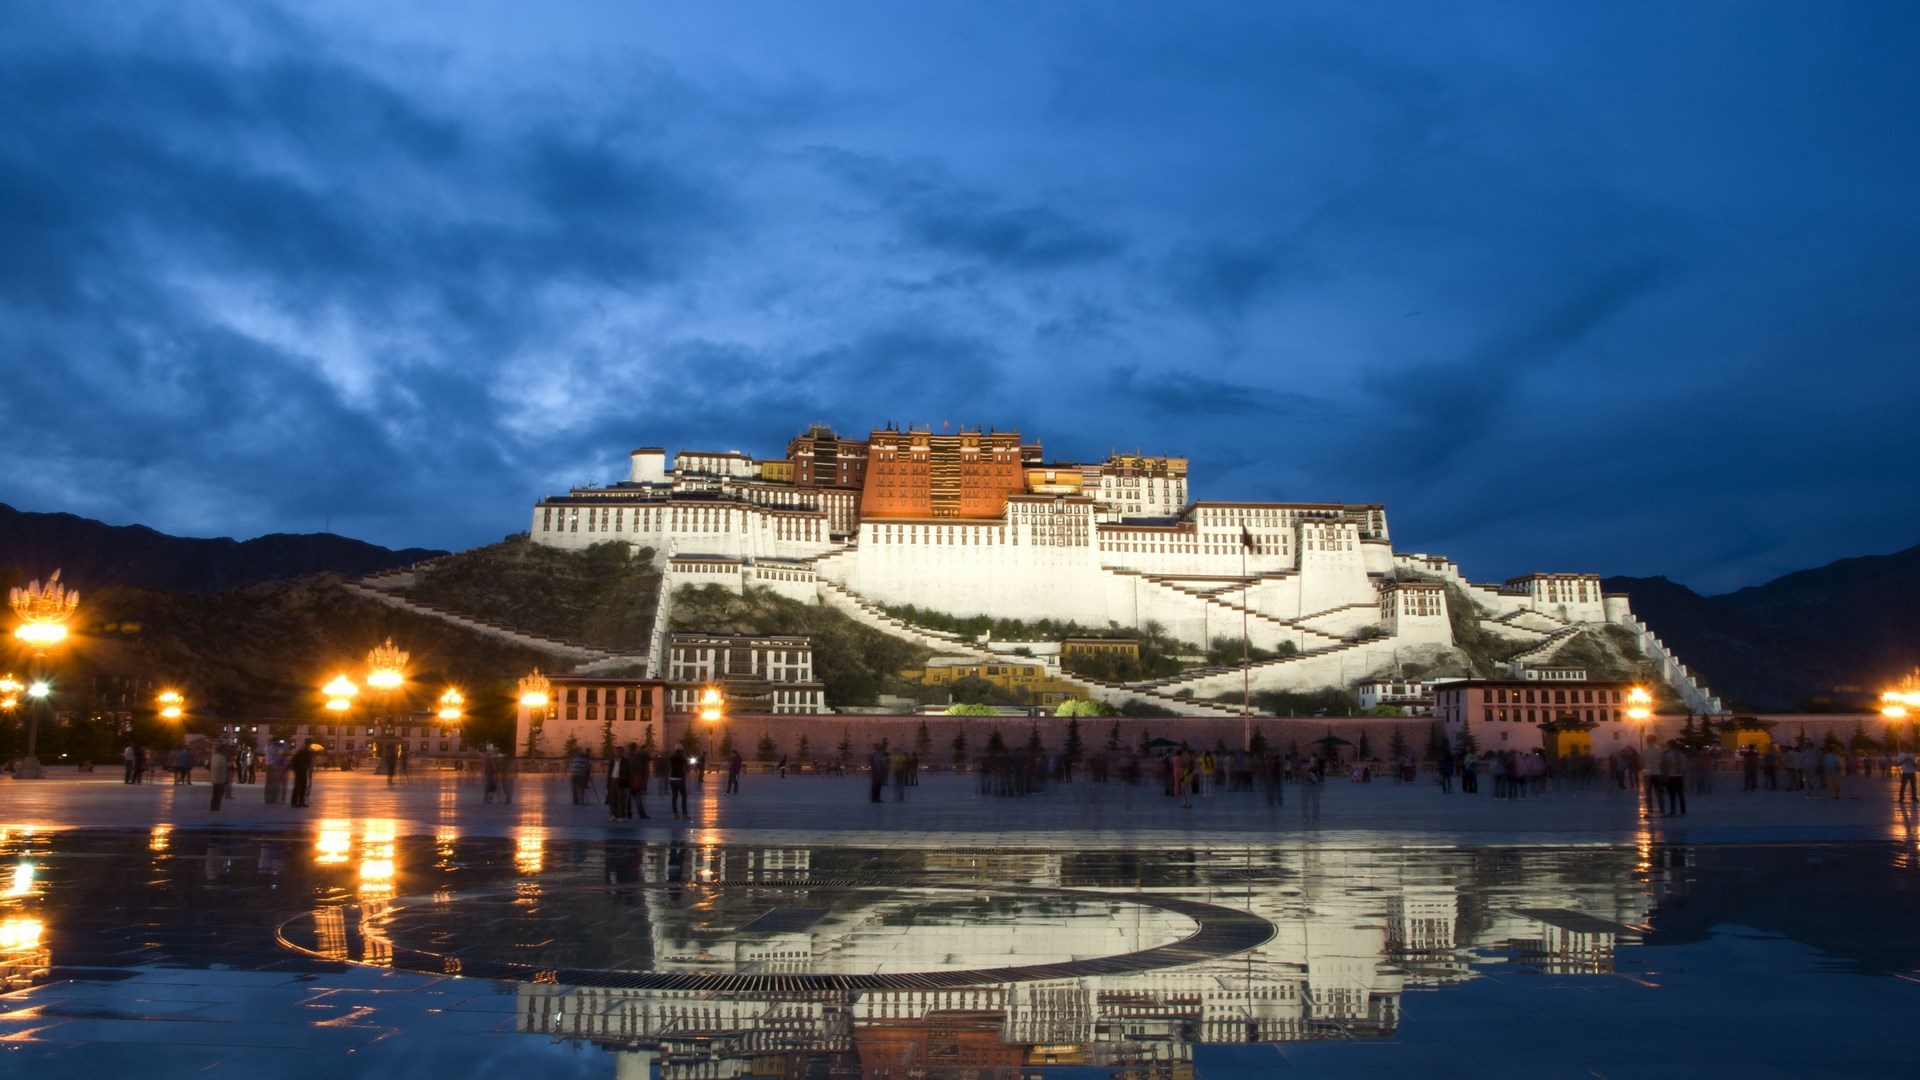 The Potala Palace: A Sacred Jewel Atop the Roof of the World